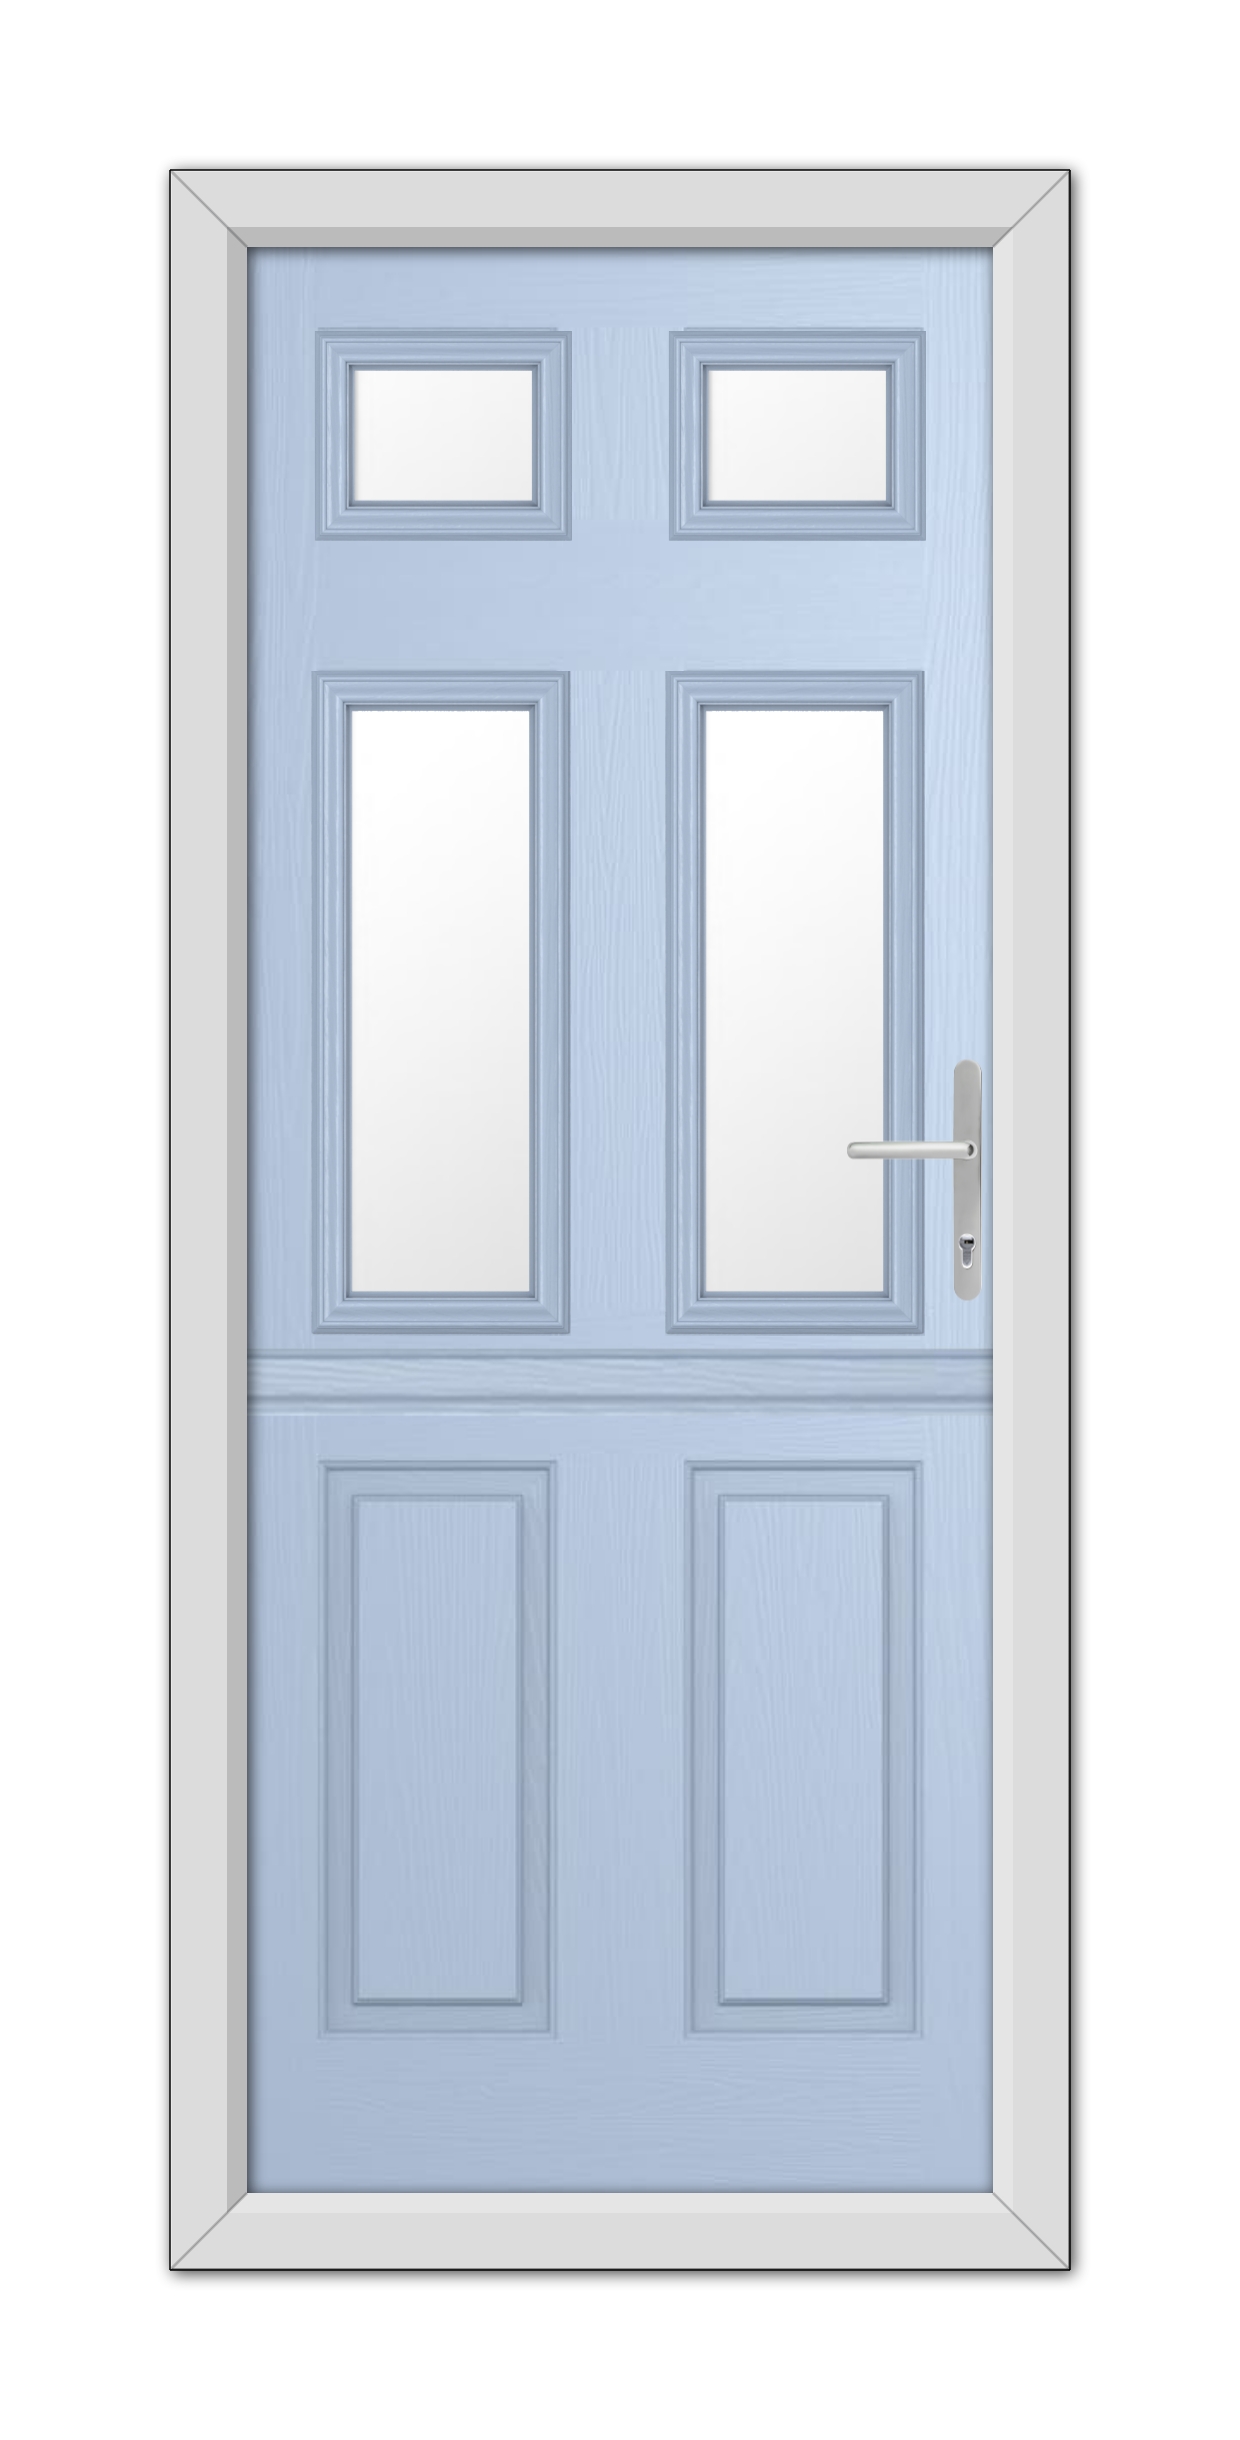 A Duck Egg Blue Middleton Glazed 4 Stable Composite Door 48mm Timber Core with four panels and three small square windows, framed in white, equipped with a silver handle.